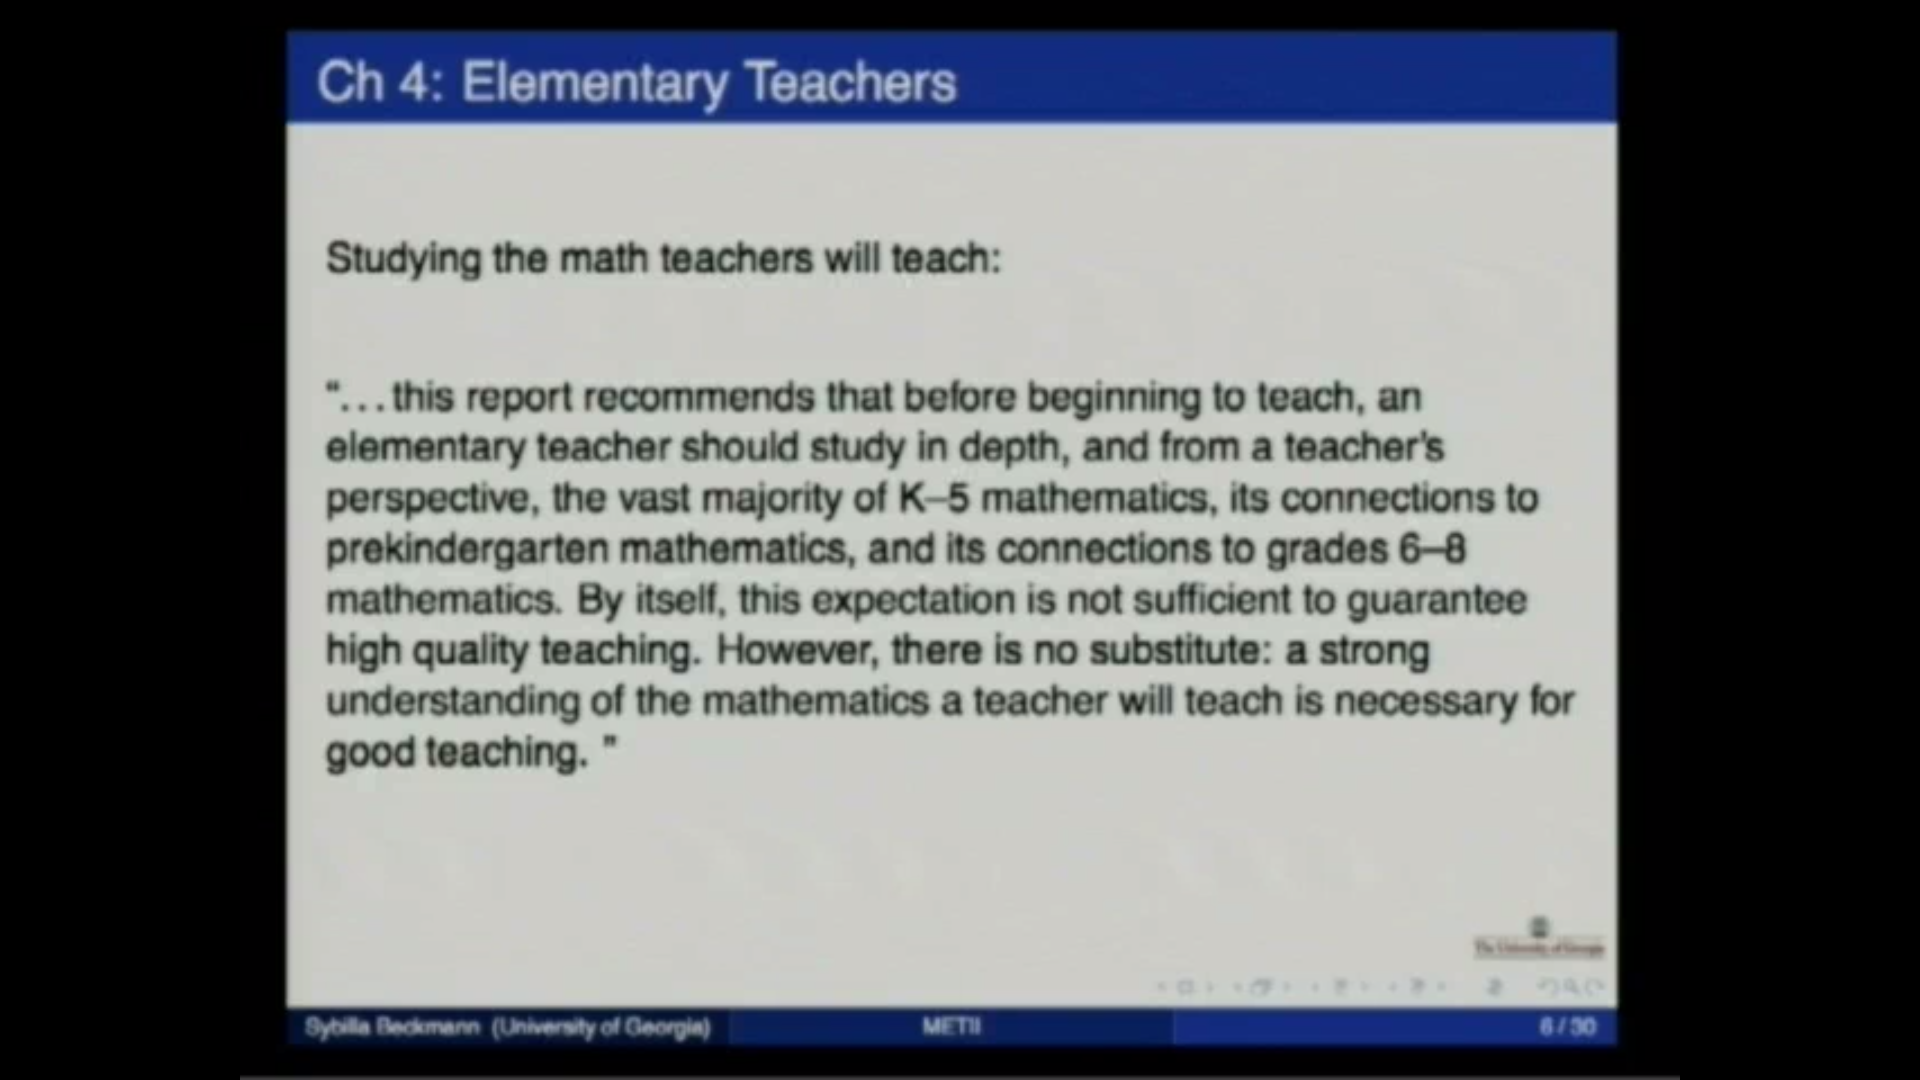 Critical Issues In Mathematics Education 2012: Teacher Education In View Of The Common Core, lecture 7b - Professional resources for learning to teach the Common Core Thumbnail